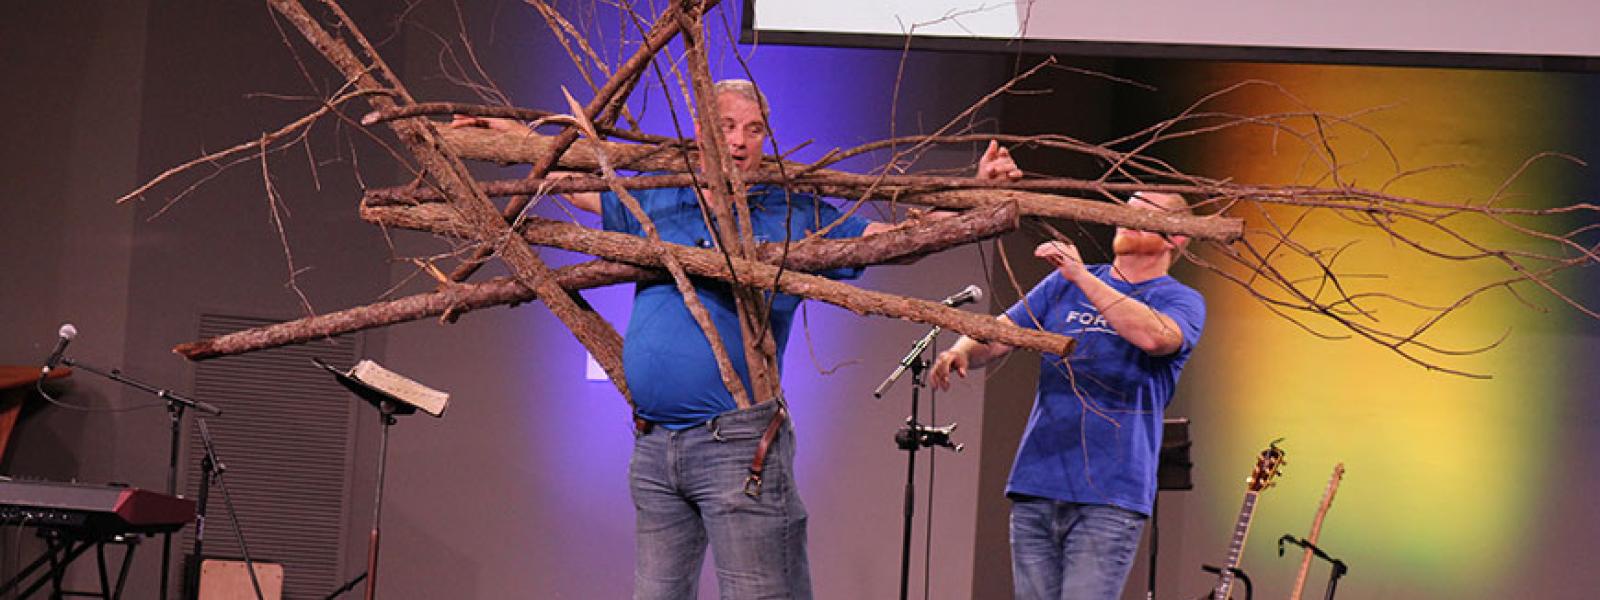 CIU alumnus Adrian Despres of Forge uses tree branches symbolizing sins to demonstrate how sin affects the Christian life. 